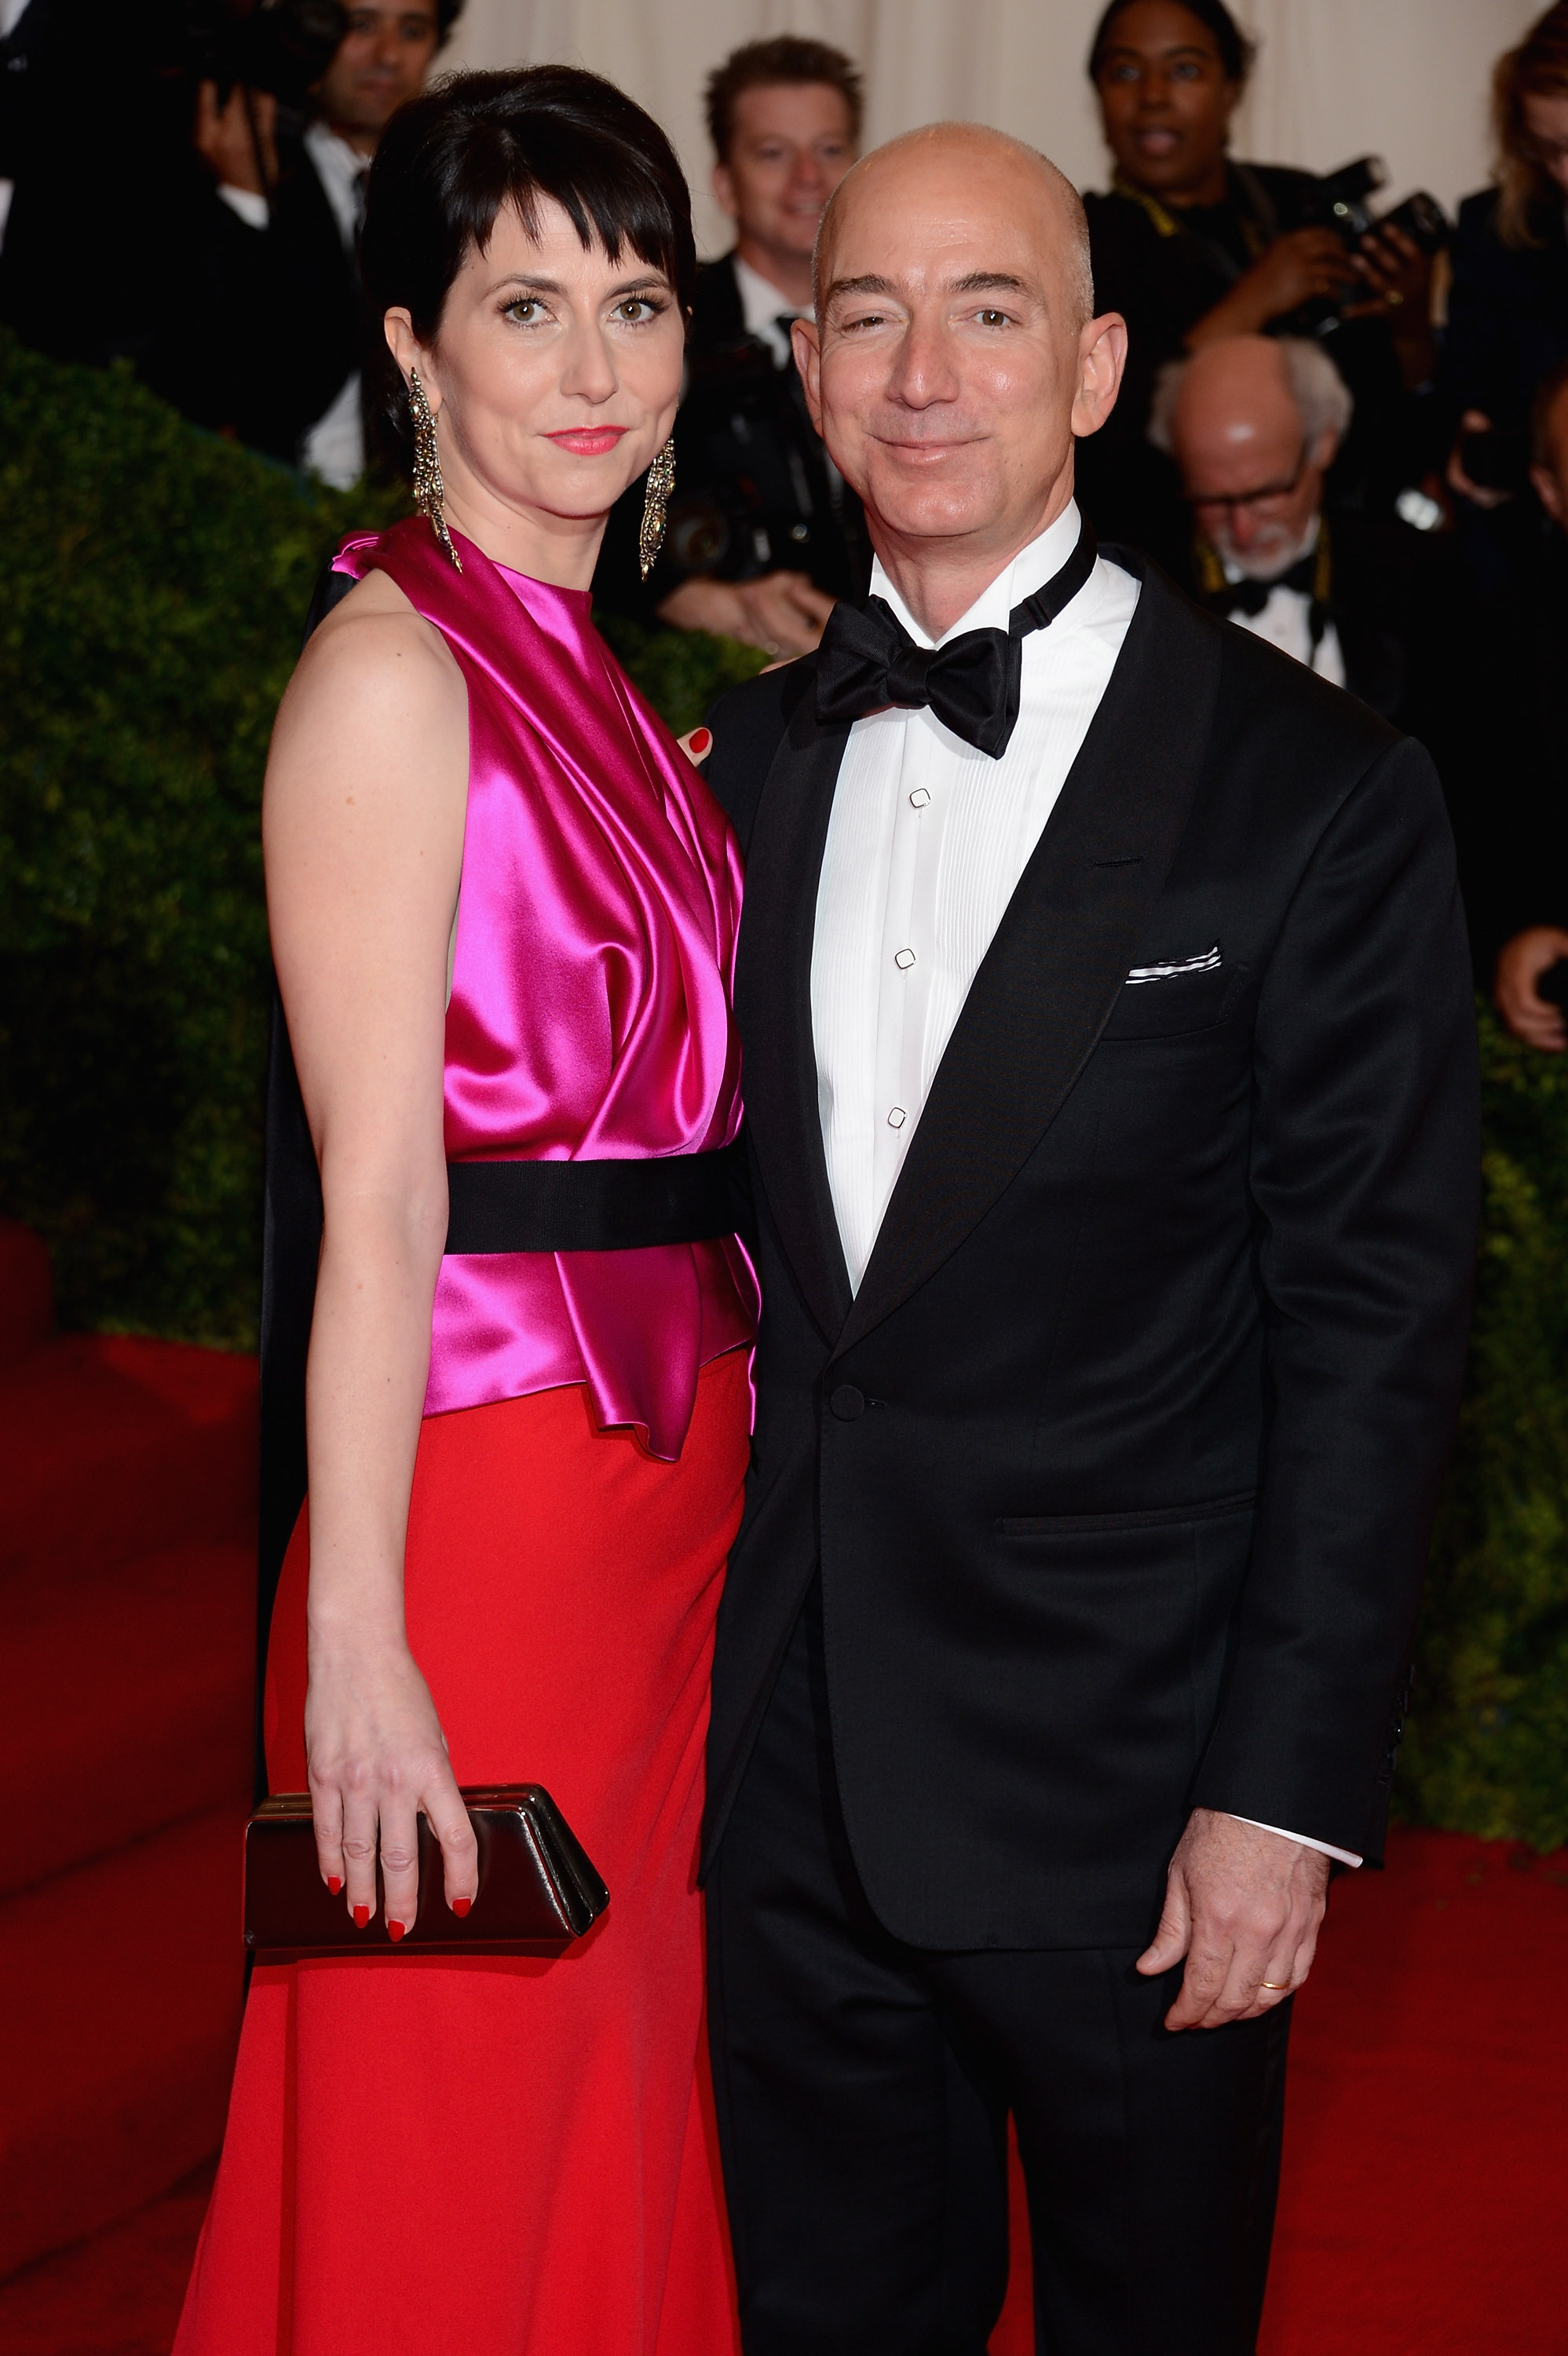 Jeff Bezos in a tux with with his wife MacKenzie in a pink and red gown on red carpet at the 2012 Met Gala in New York City.